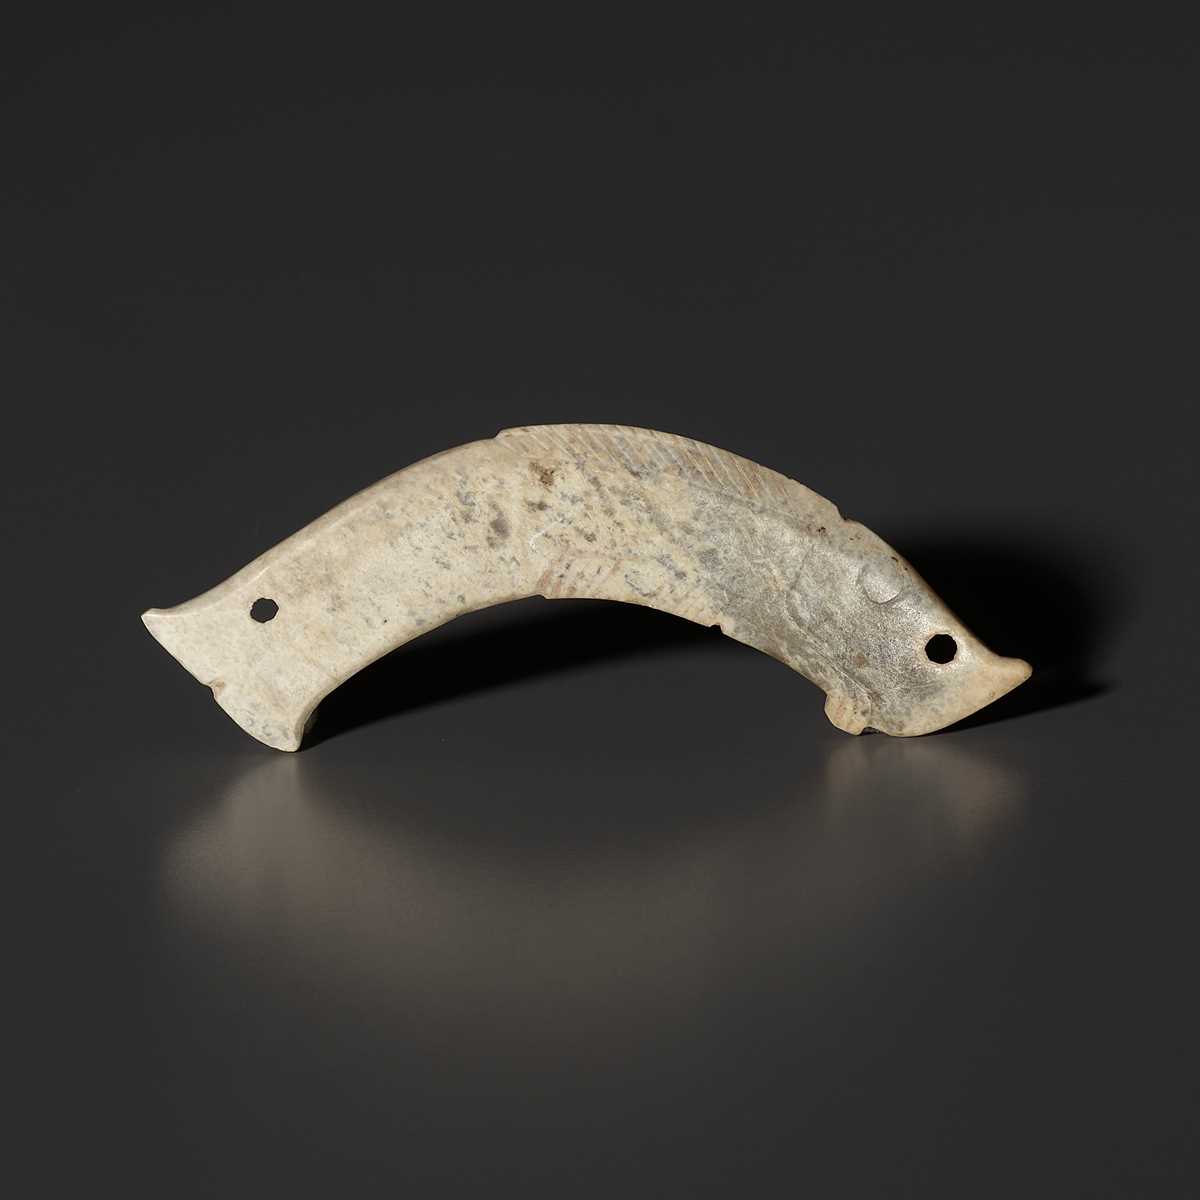 Lot 29 - A PALE CELADON JADE ‘FISH’ PENDANT, LATE SHANG TO WESTERN ZHOU DYNASTY